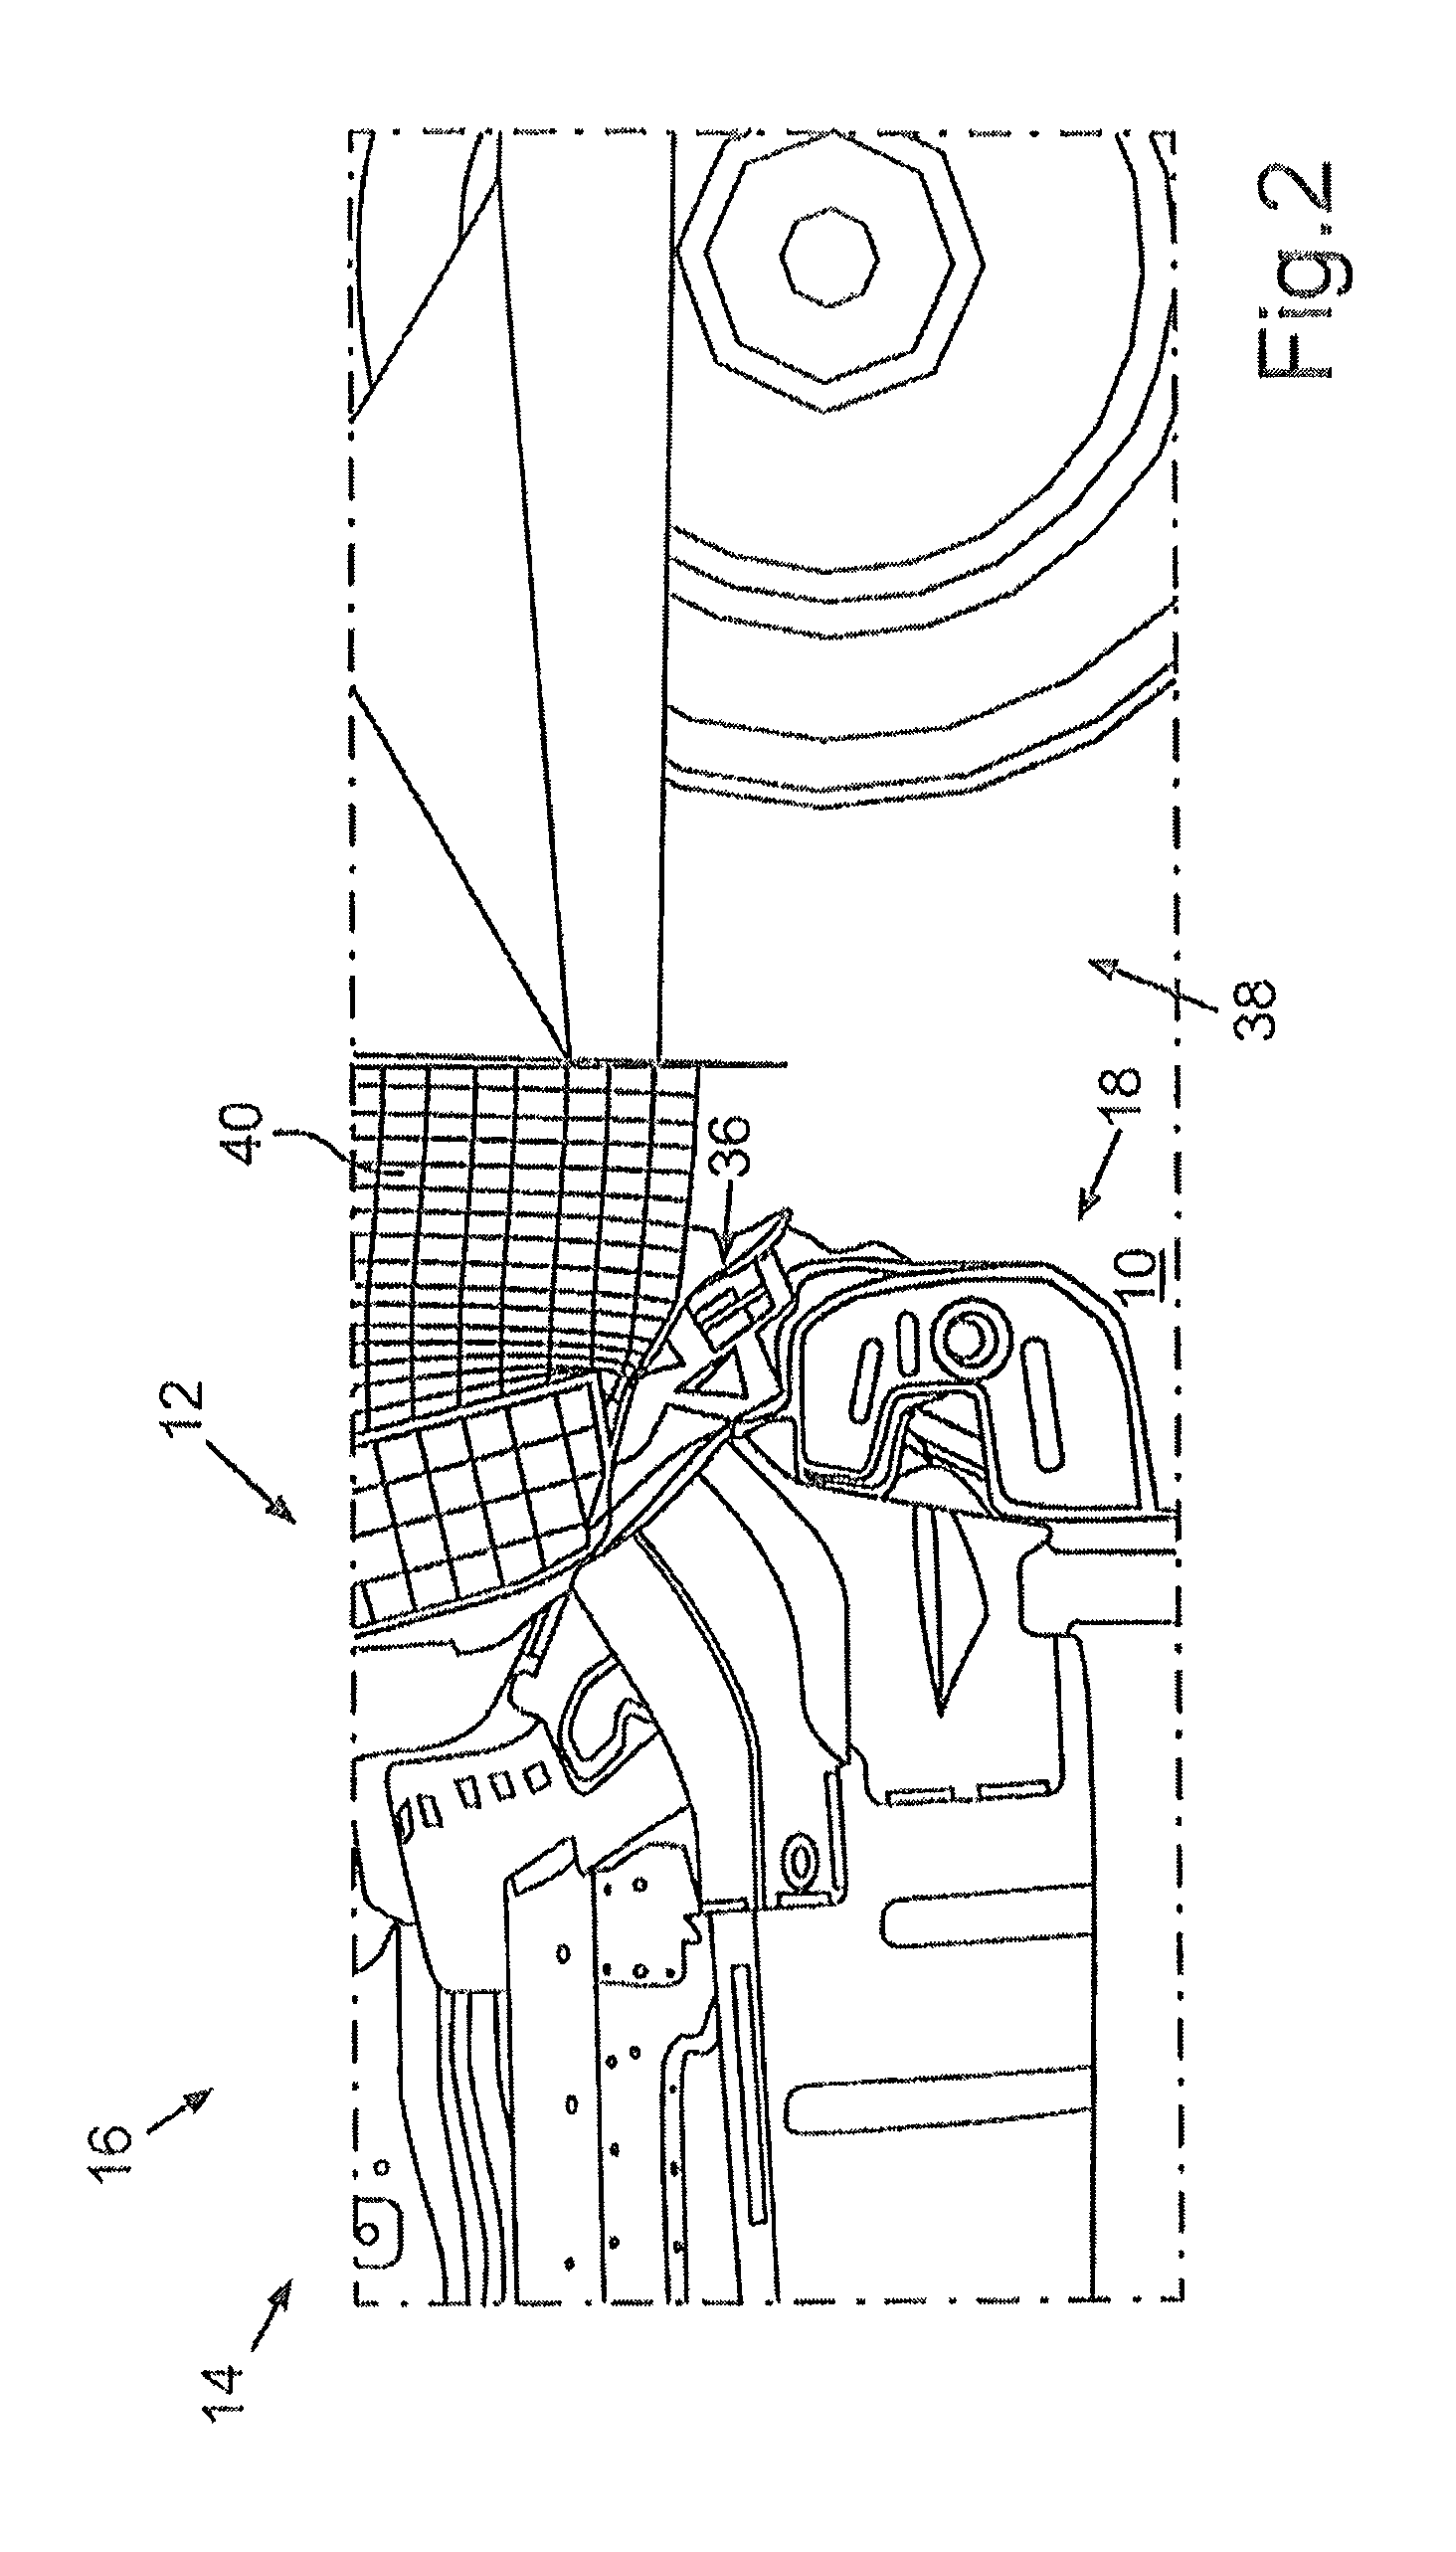 Arrangment of a side door on a body of a motor vehicle